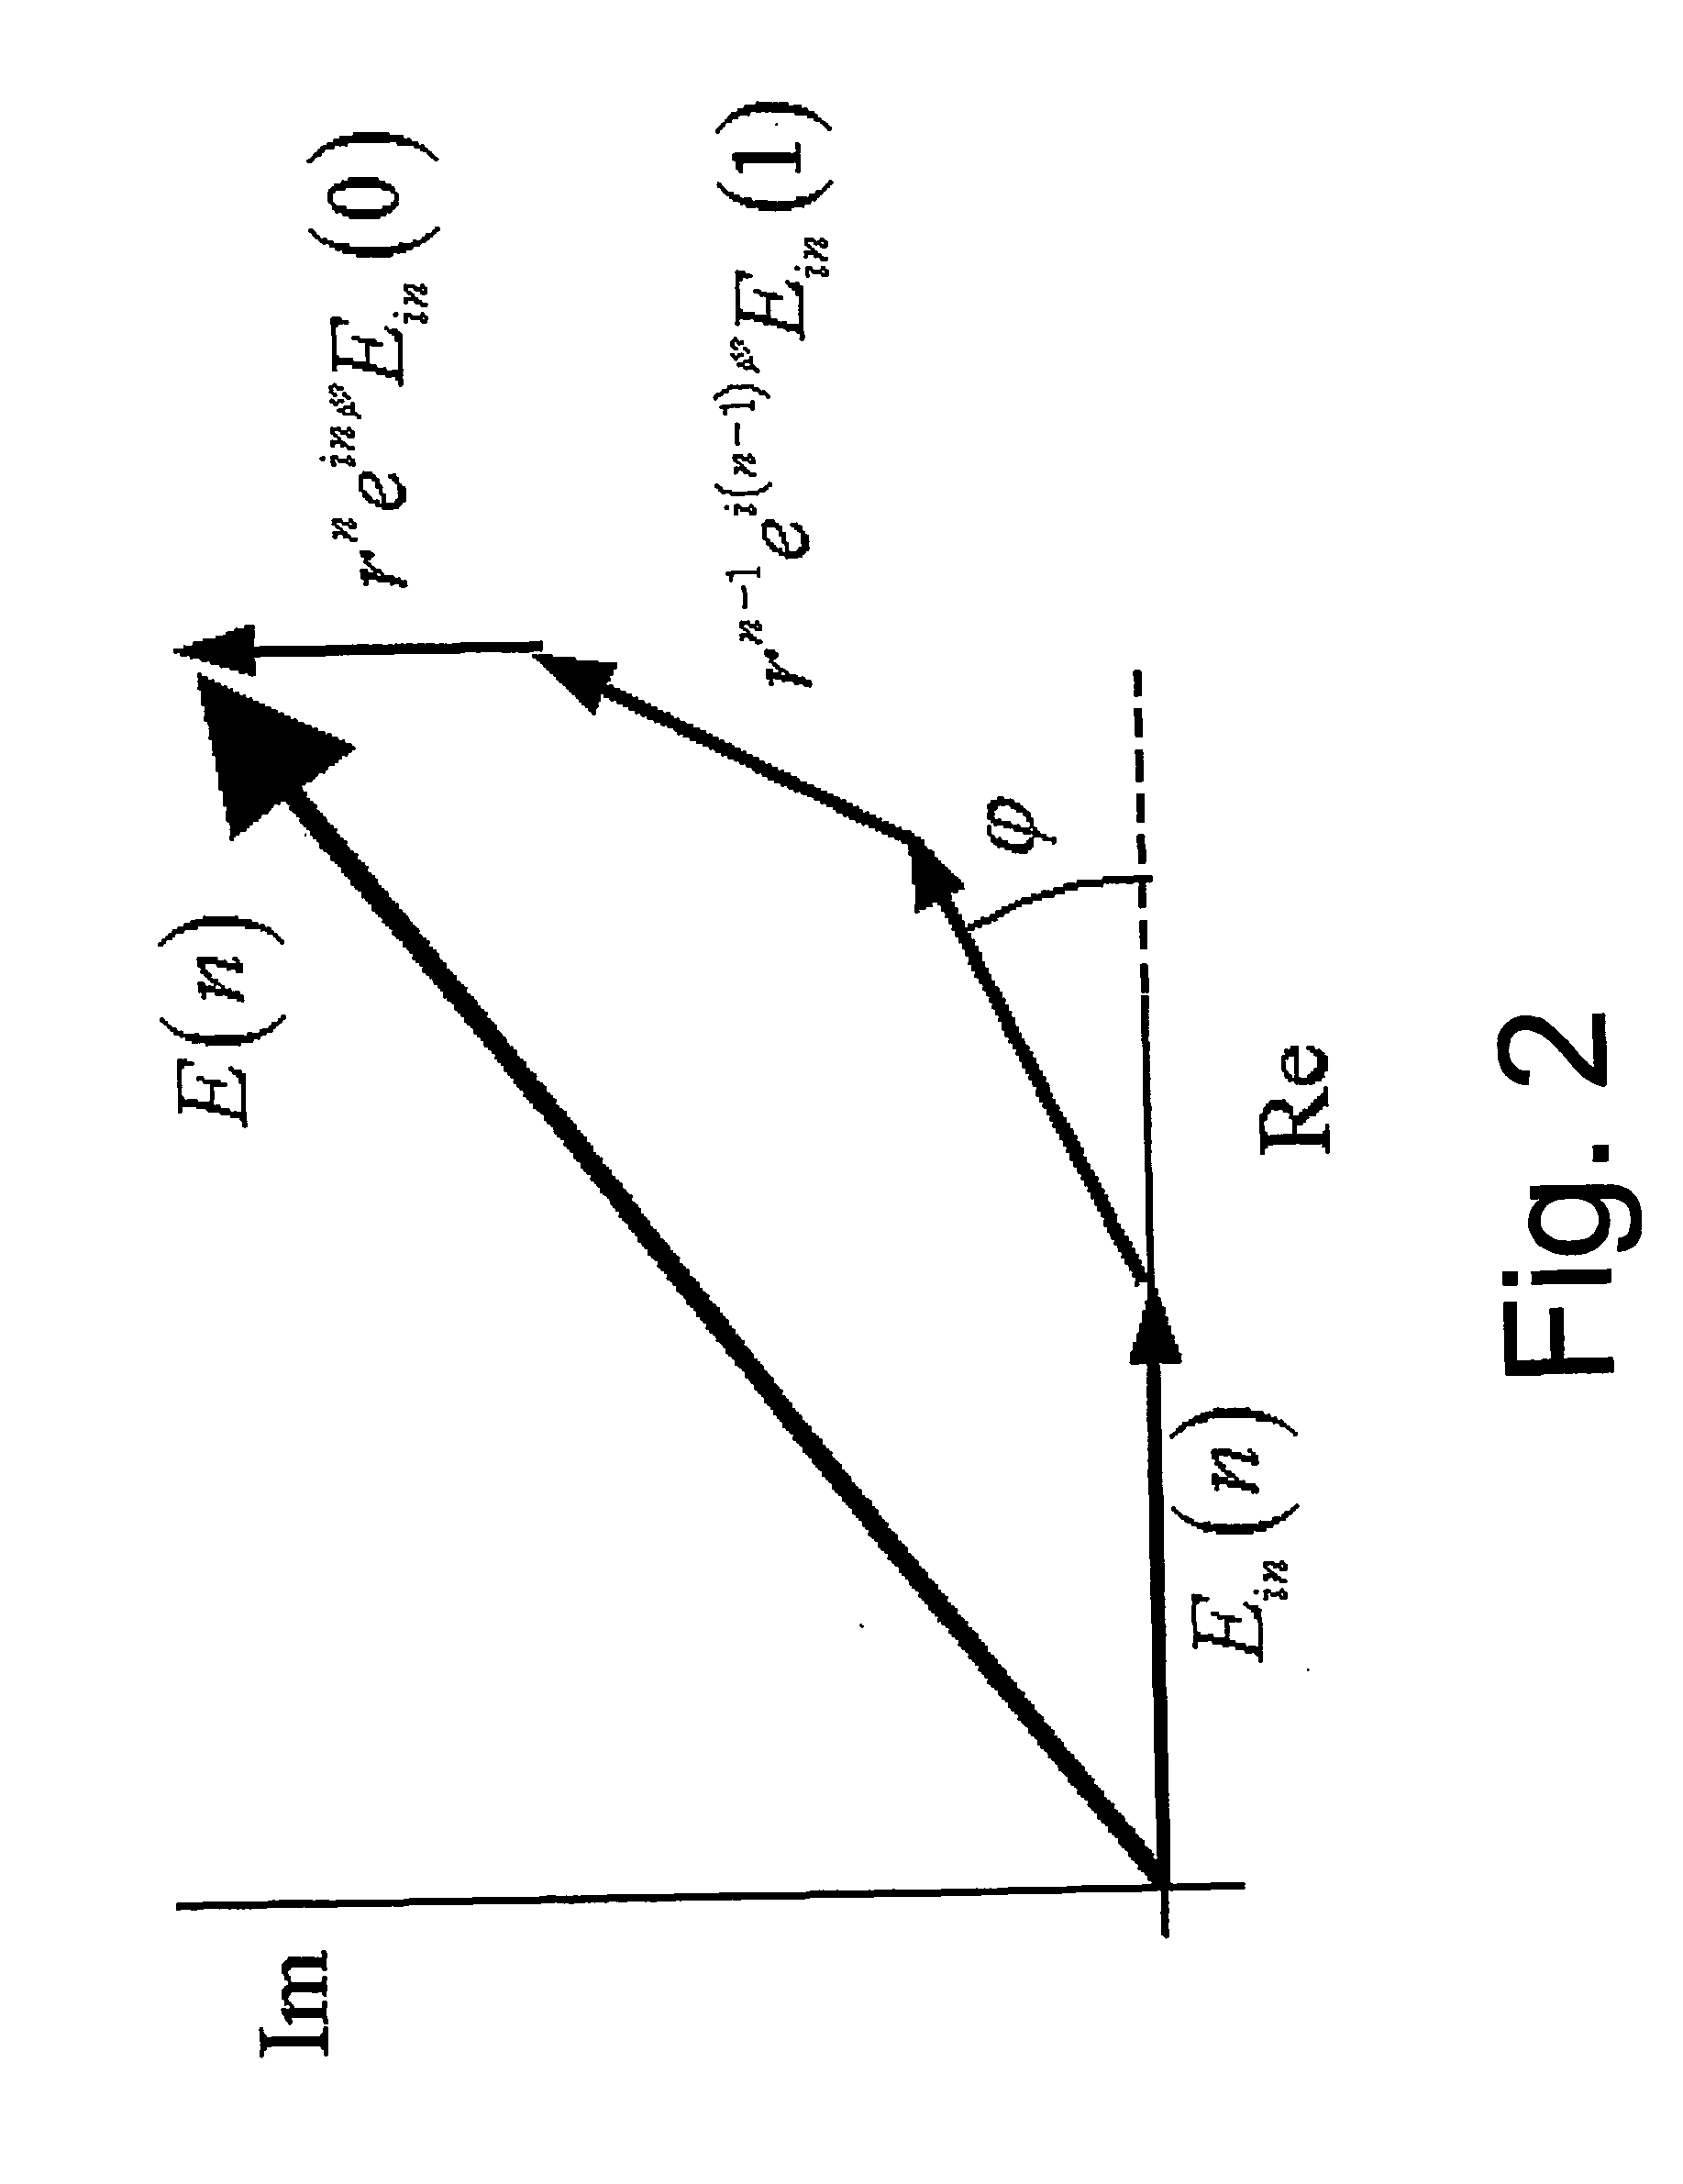 All-optical signal processing method and device